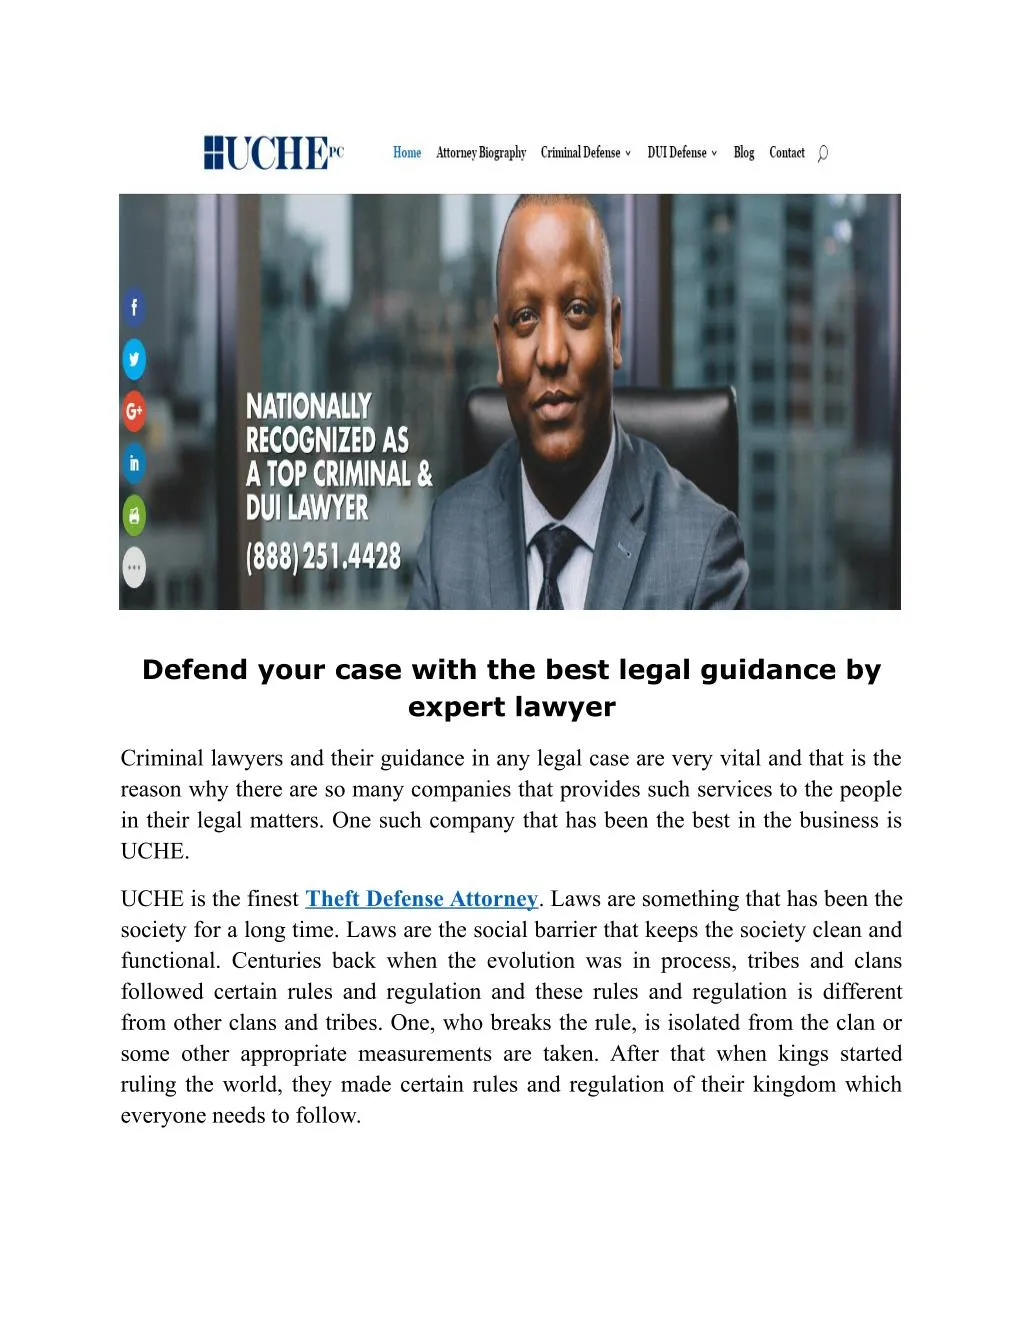 defend your case with the best legal guidance